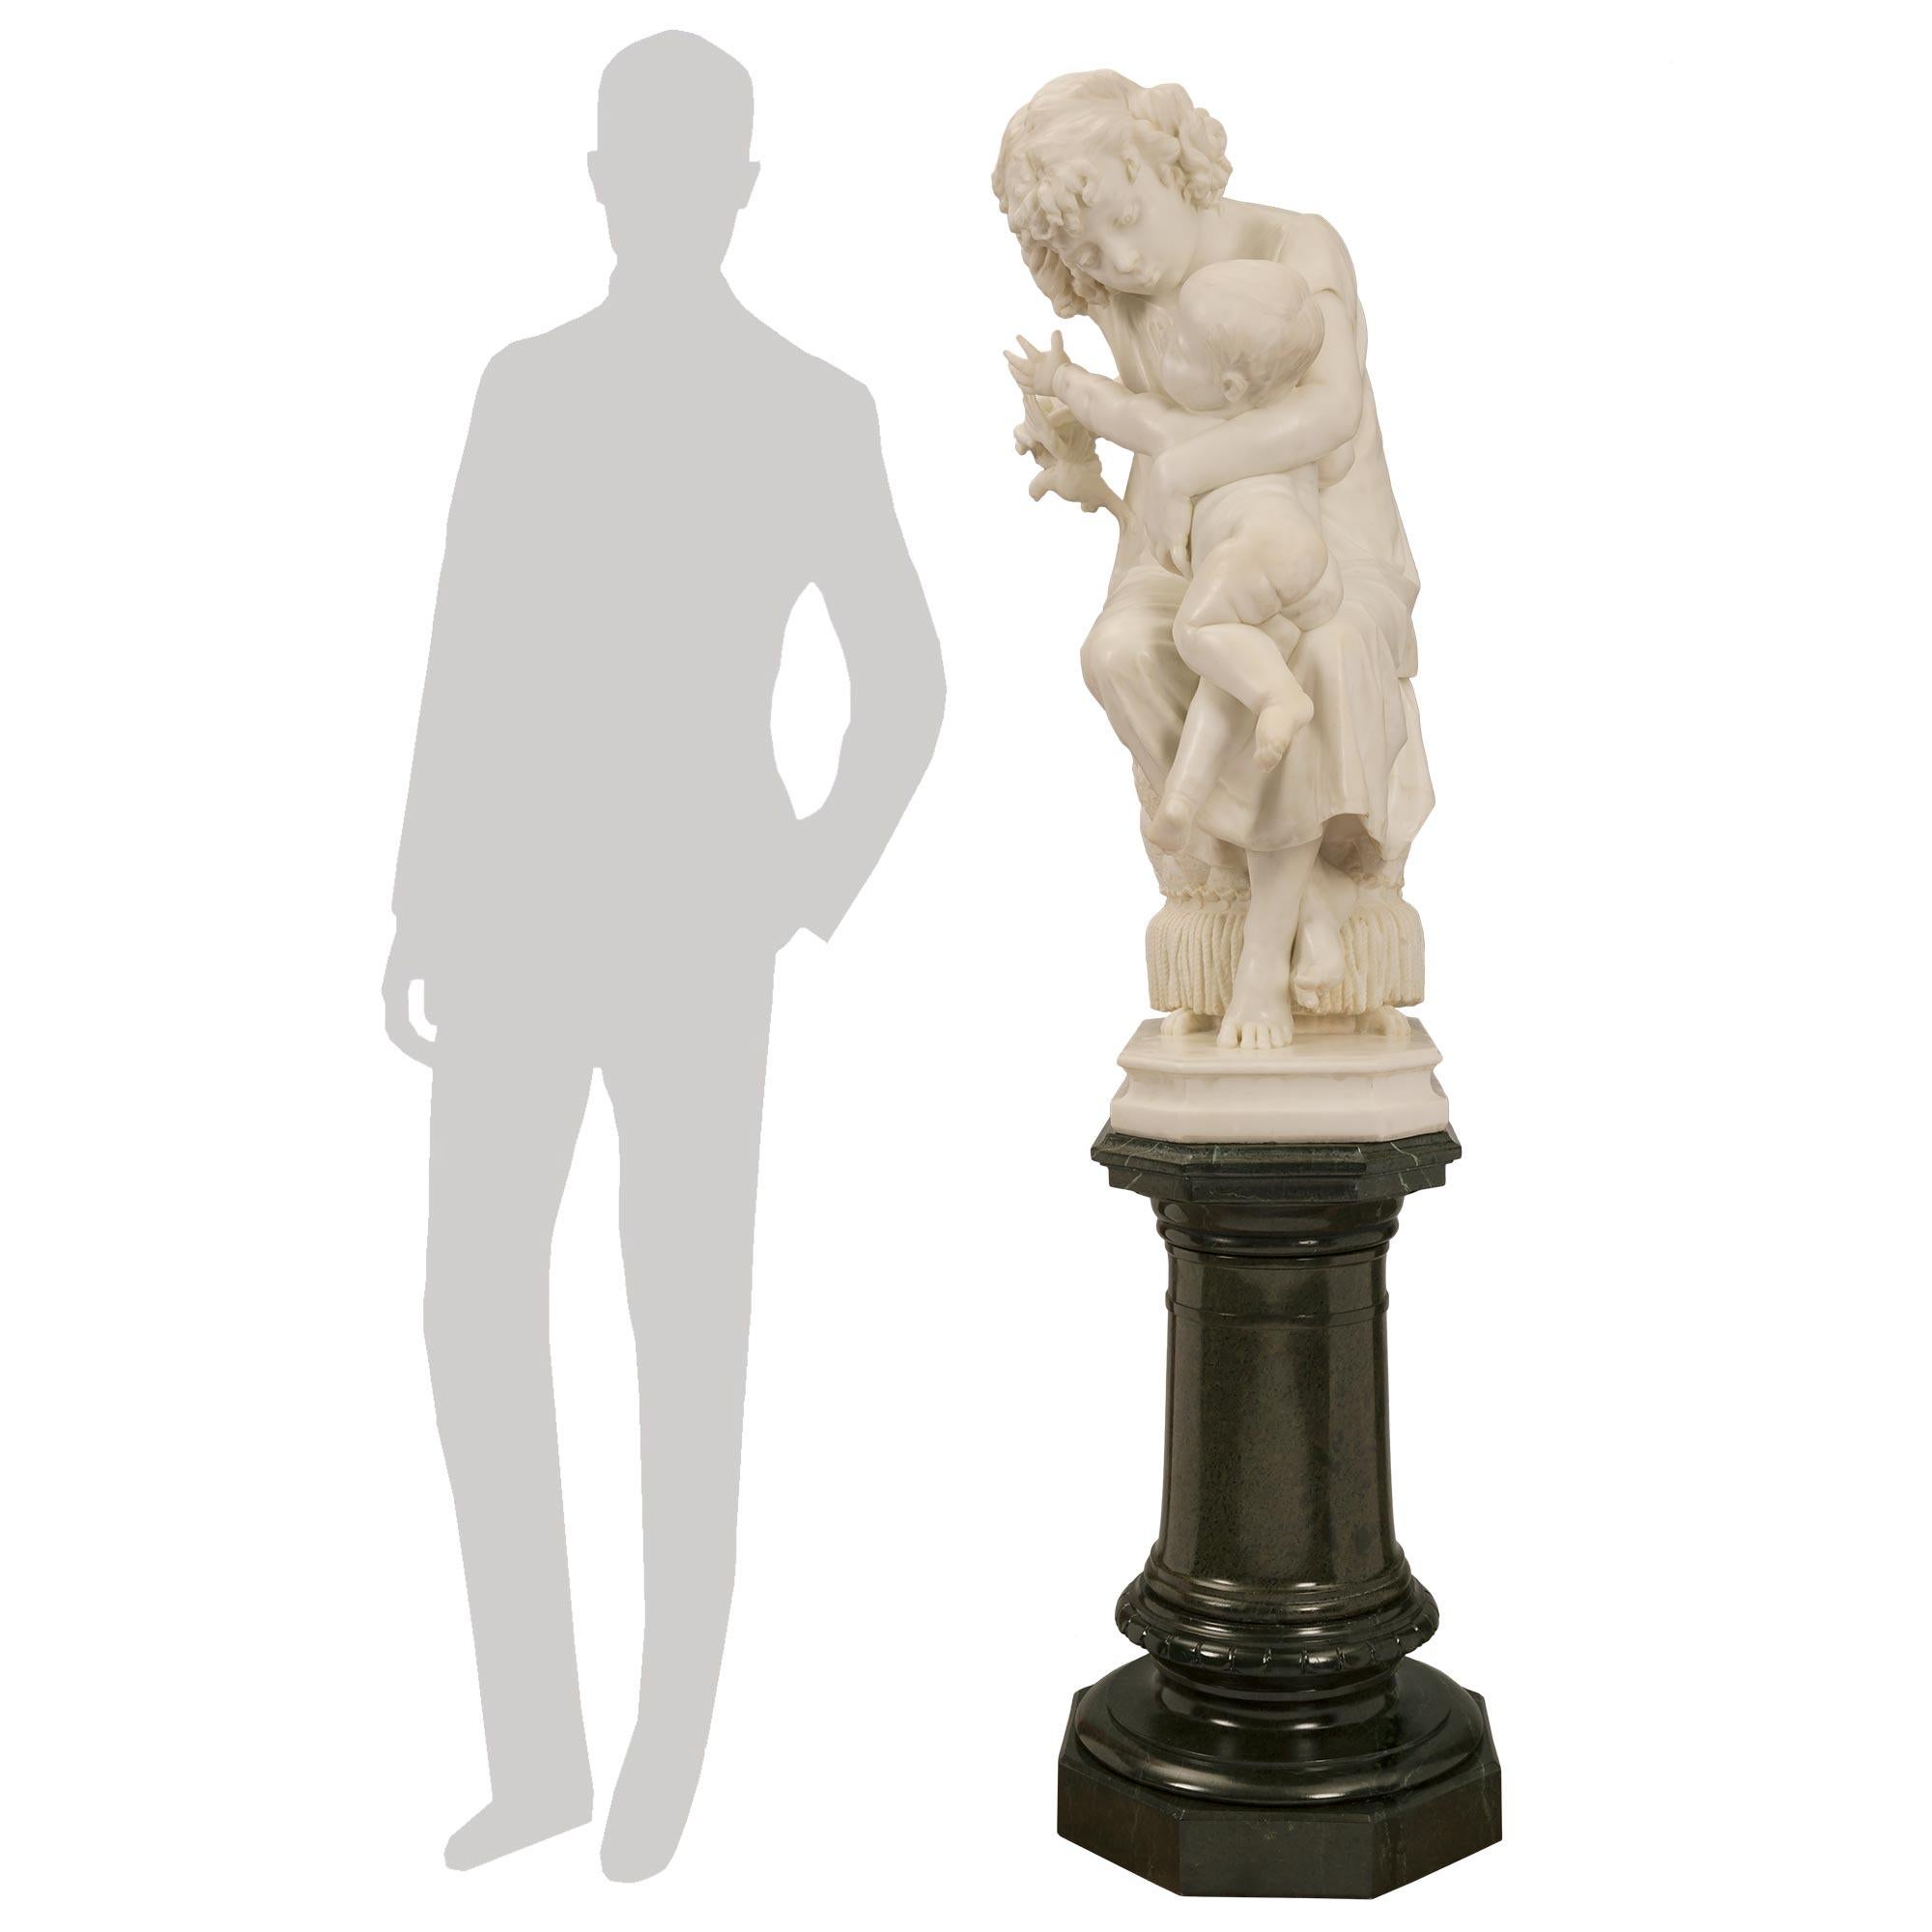 A stunning Italian 19th century white Carrara marble statue on its original Vert de Patricia marble swivel pedestal. The statue depicts a beautiful young girl consoling her baby brother after she has taken away a bird that he was playing with. The